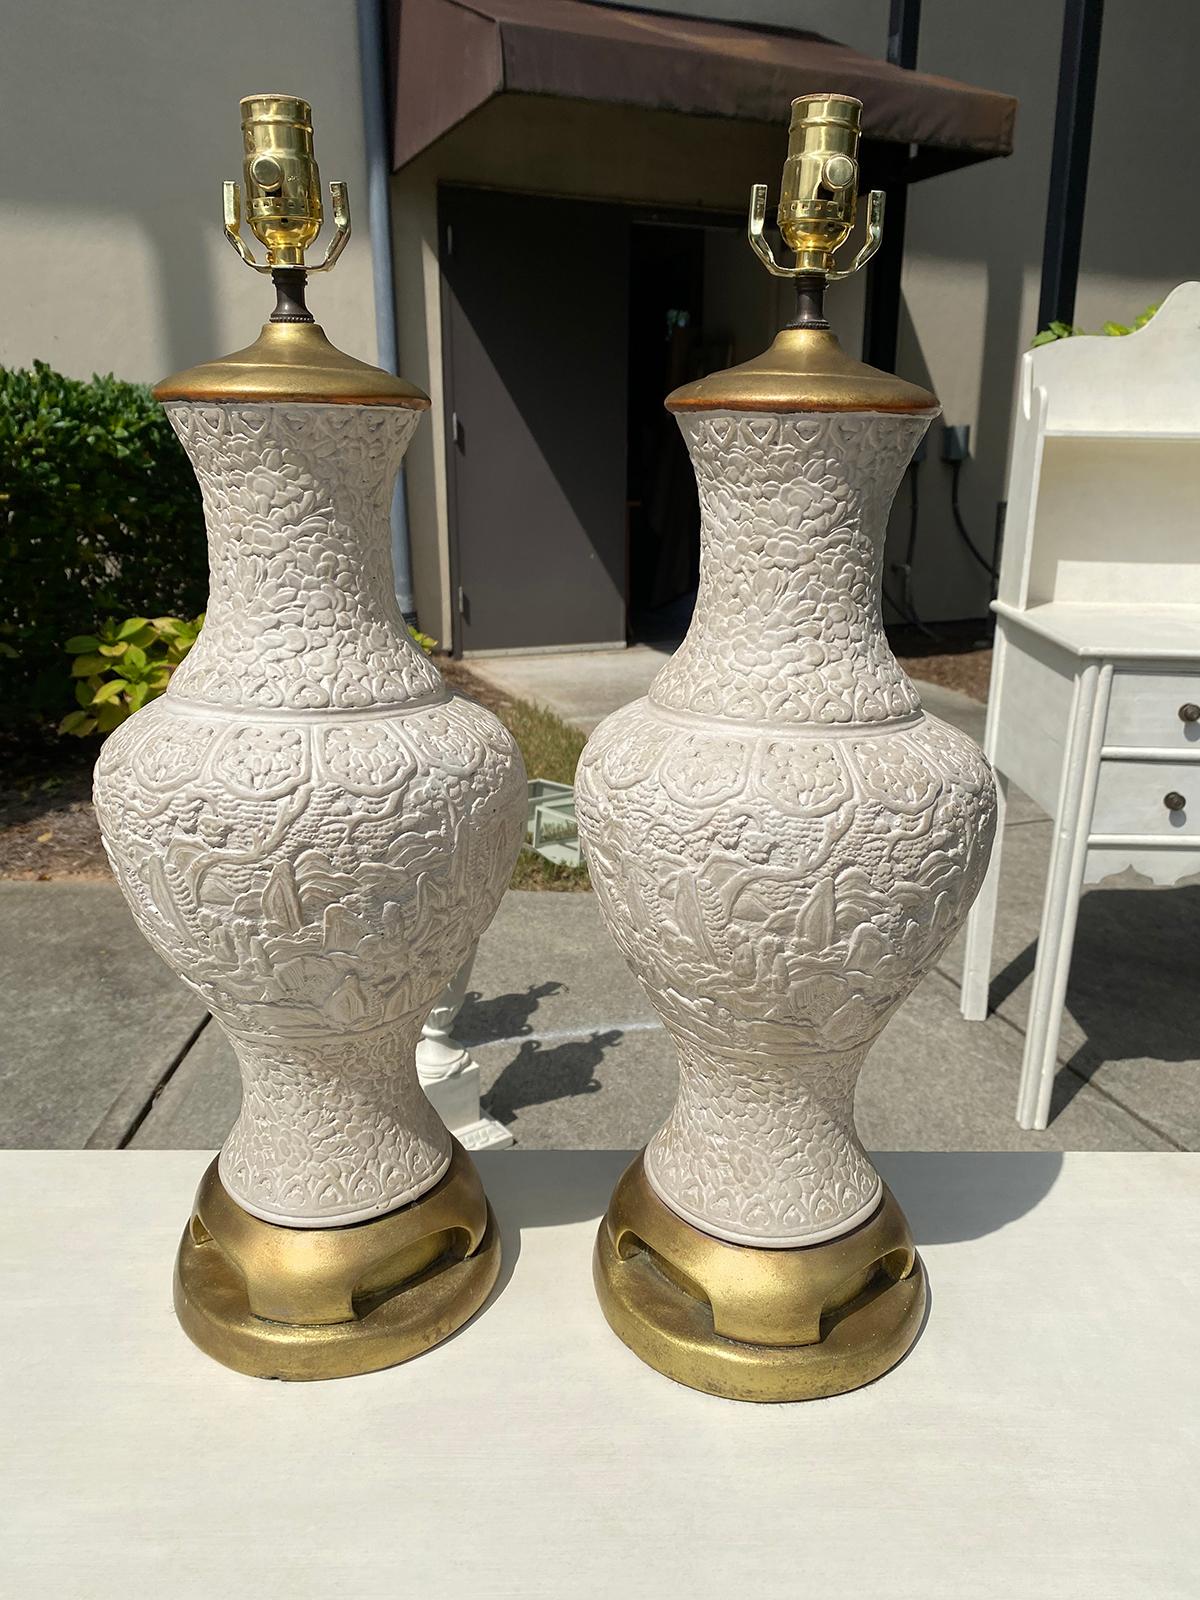 Pair of mid-20th century oriental cinnabar style terracotta lamps with hand-painted custom finish. Giltwood bases.
New wiring.